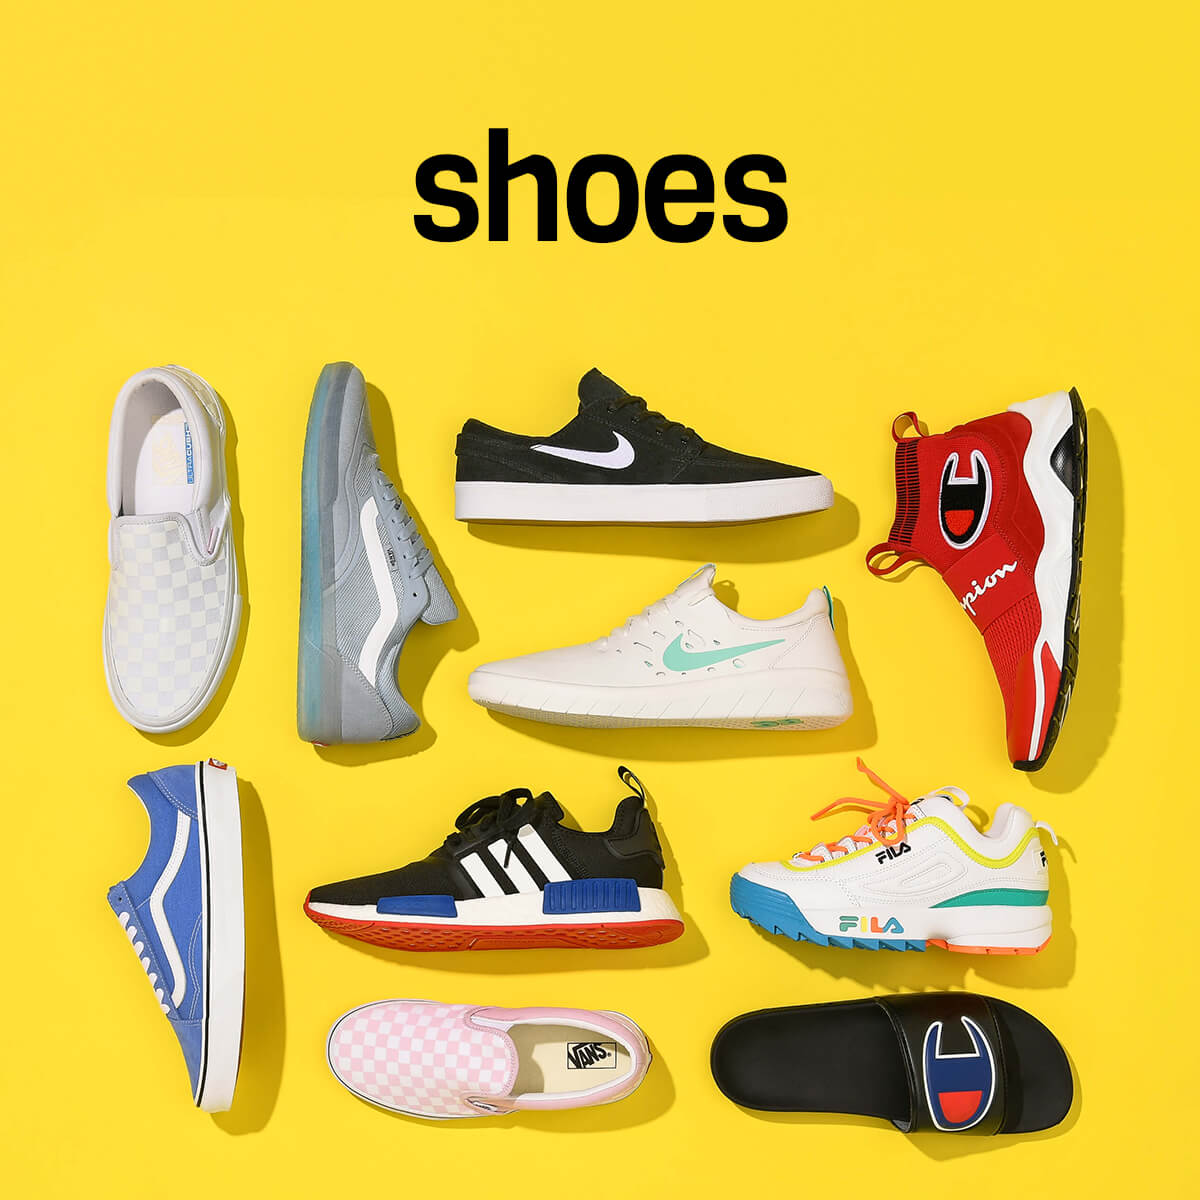 NEW ARRIVAL FOOTWEAR FROM TOP BRANDS - SHOP SHOES